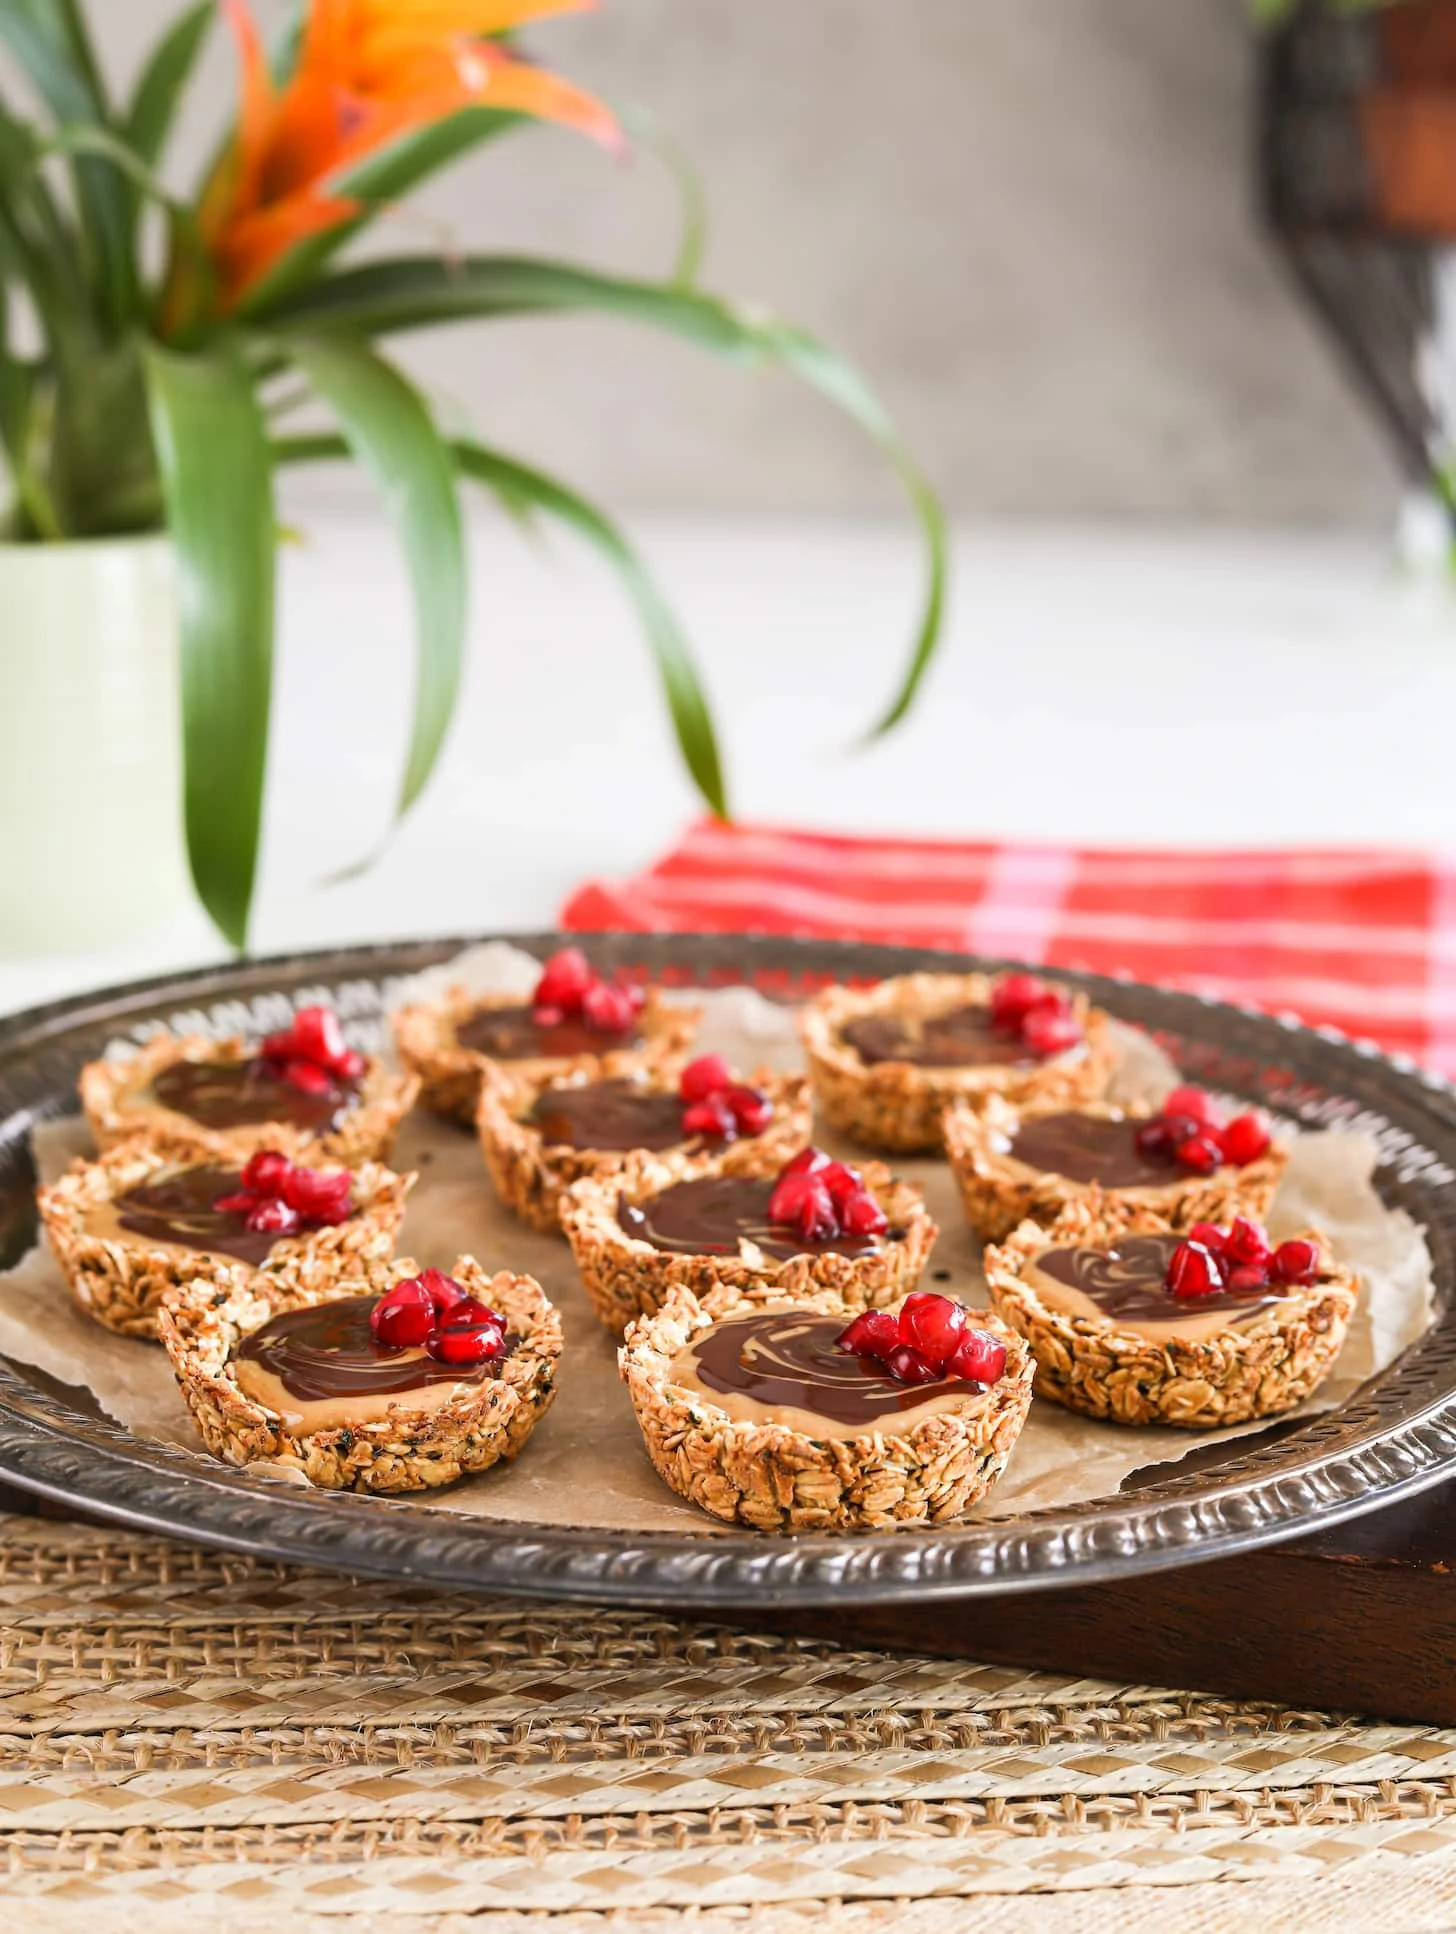 A round tray holding oat cup cookies that are filled with peanut butter and chocolate and topped with pomegranate kernels. There is a plant in the distance.